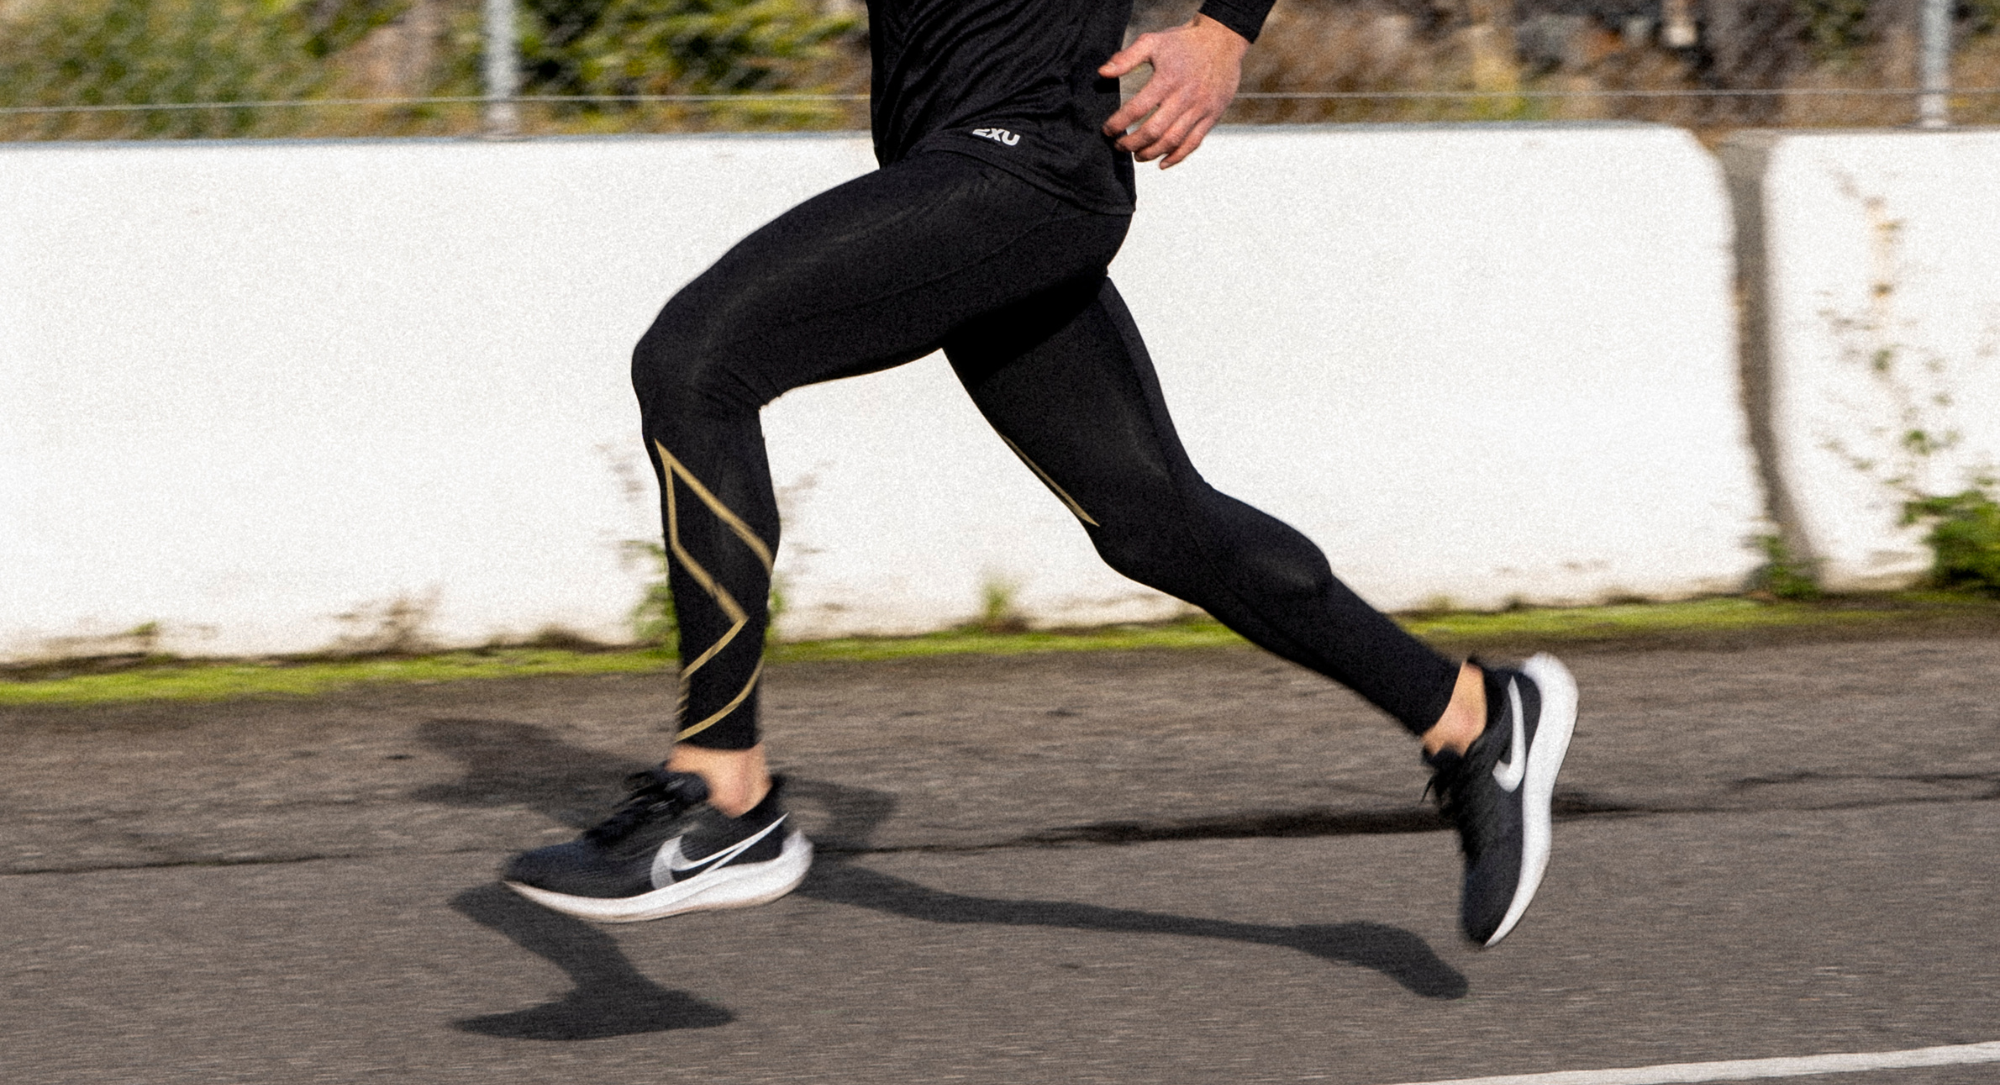 The tights every runner should own